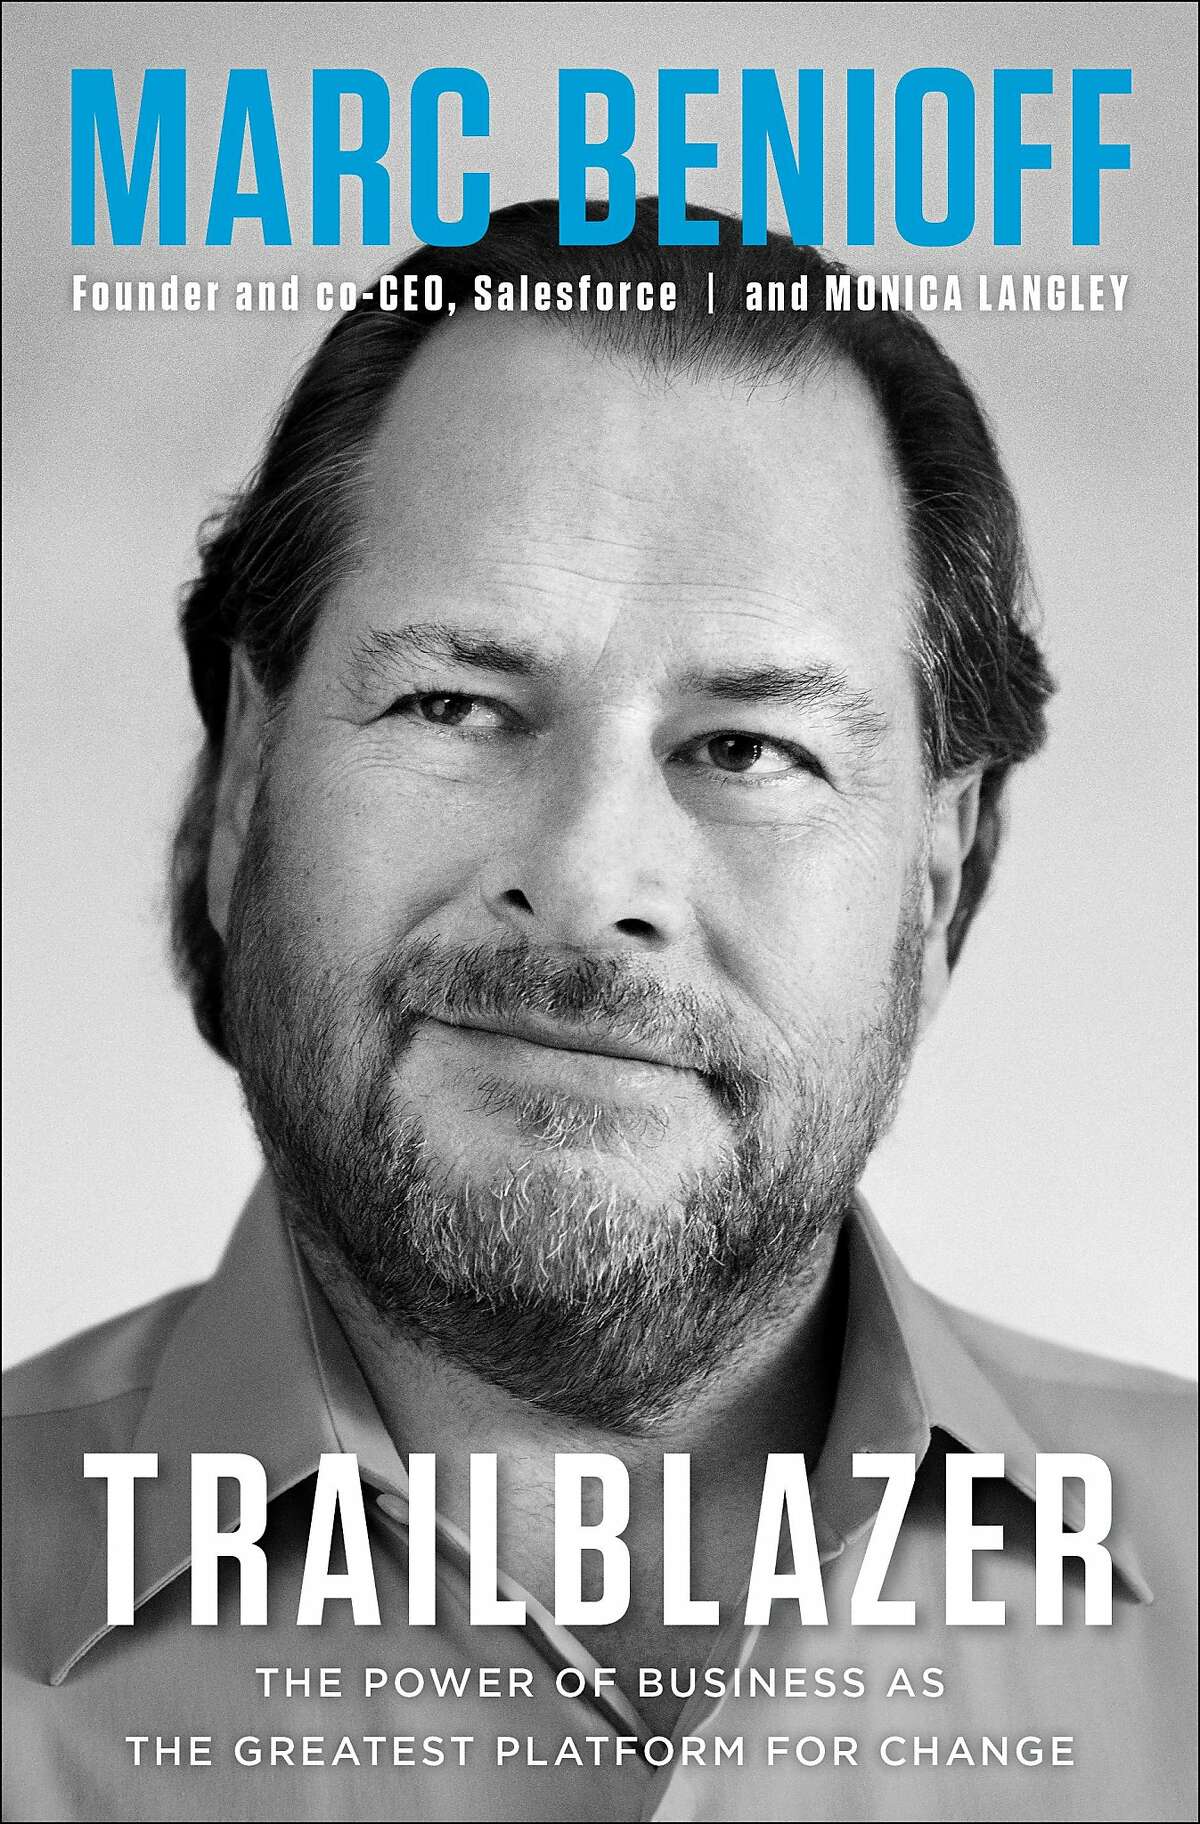 The cover of "Trailblazer," Marc Benioff's 2019 book that argues that strong company values are a path to success.